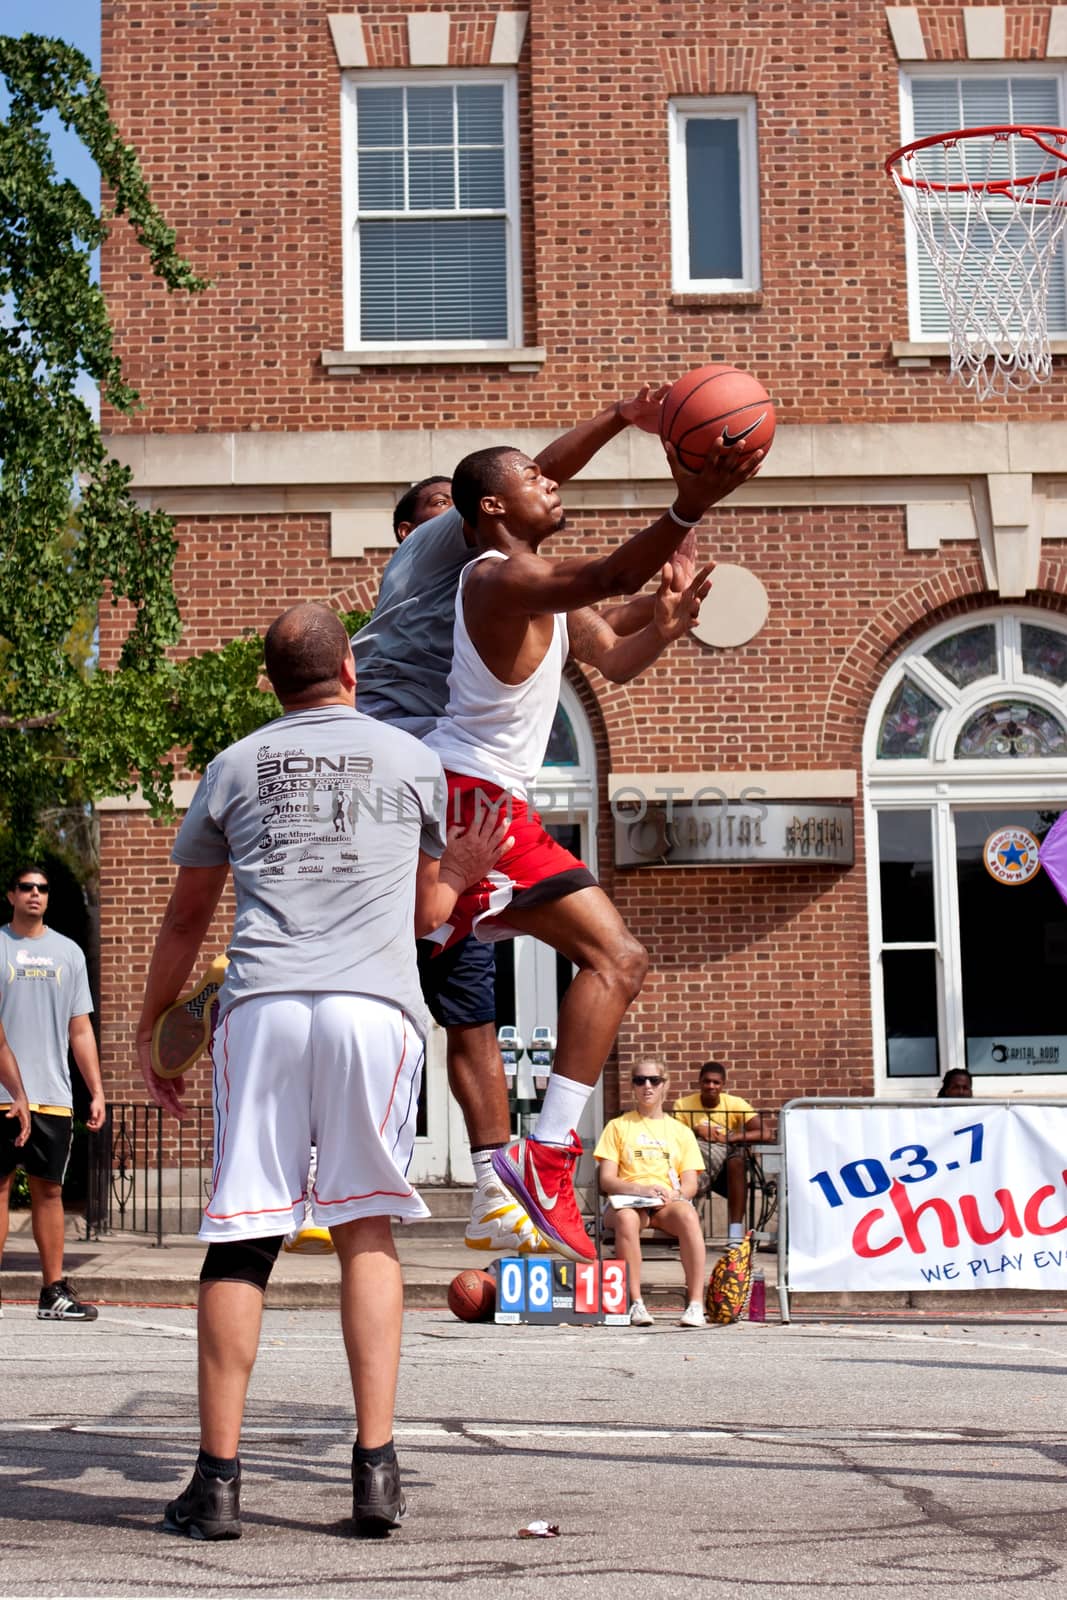 Young Man Drives To Basket In Outdoor Street Basketball Tournament by BluIz60